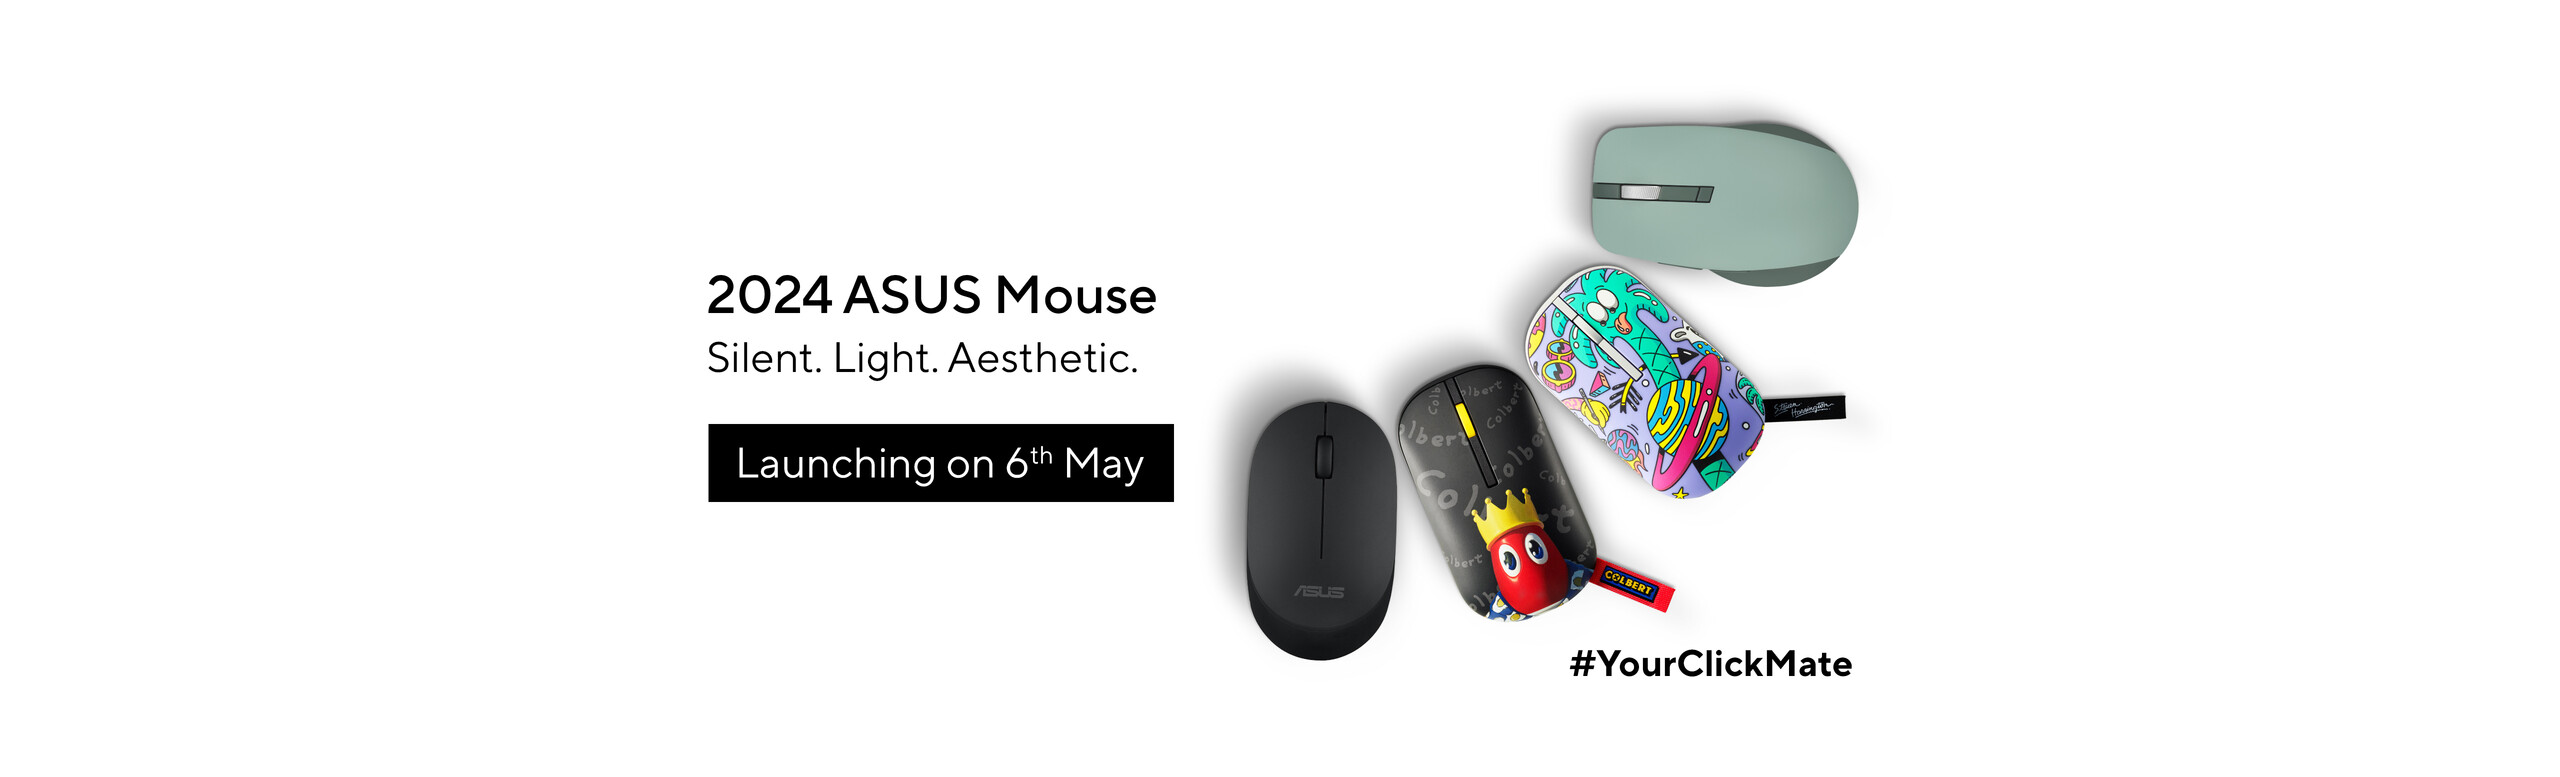 Wireless Mouse Q2-24